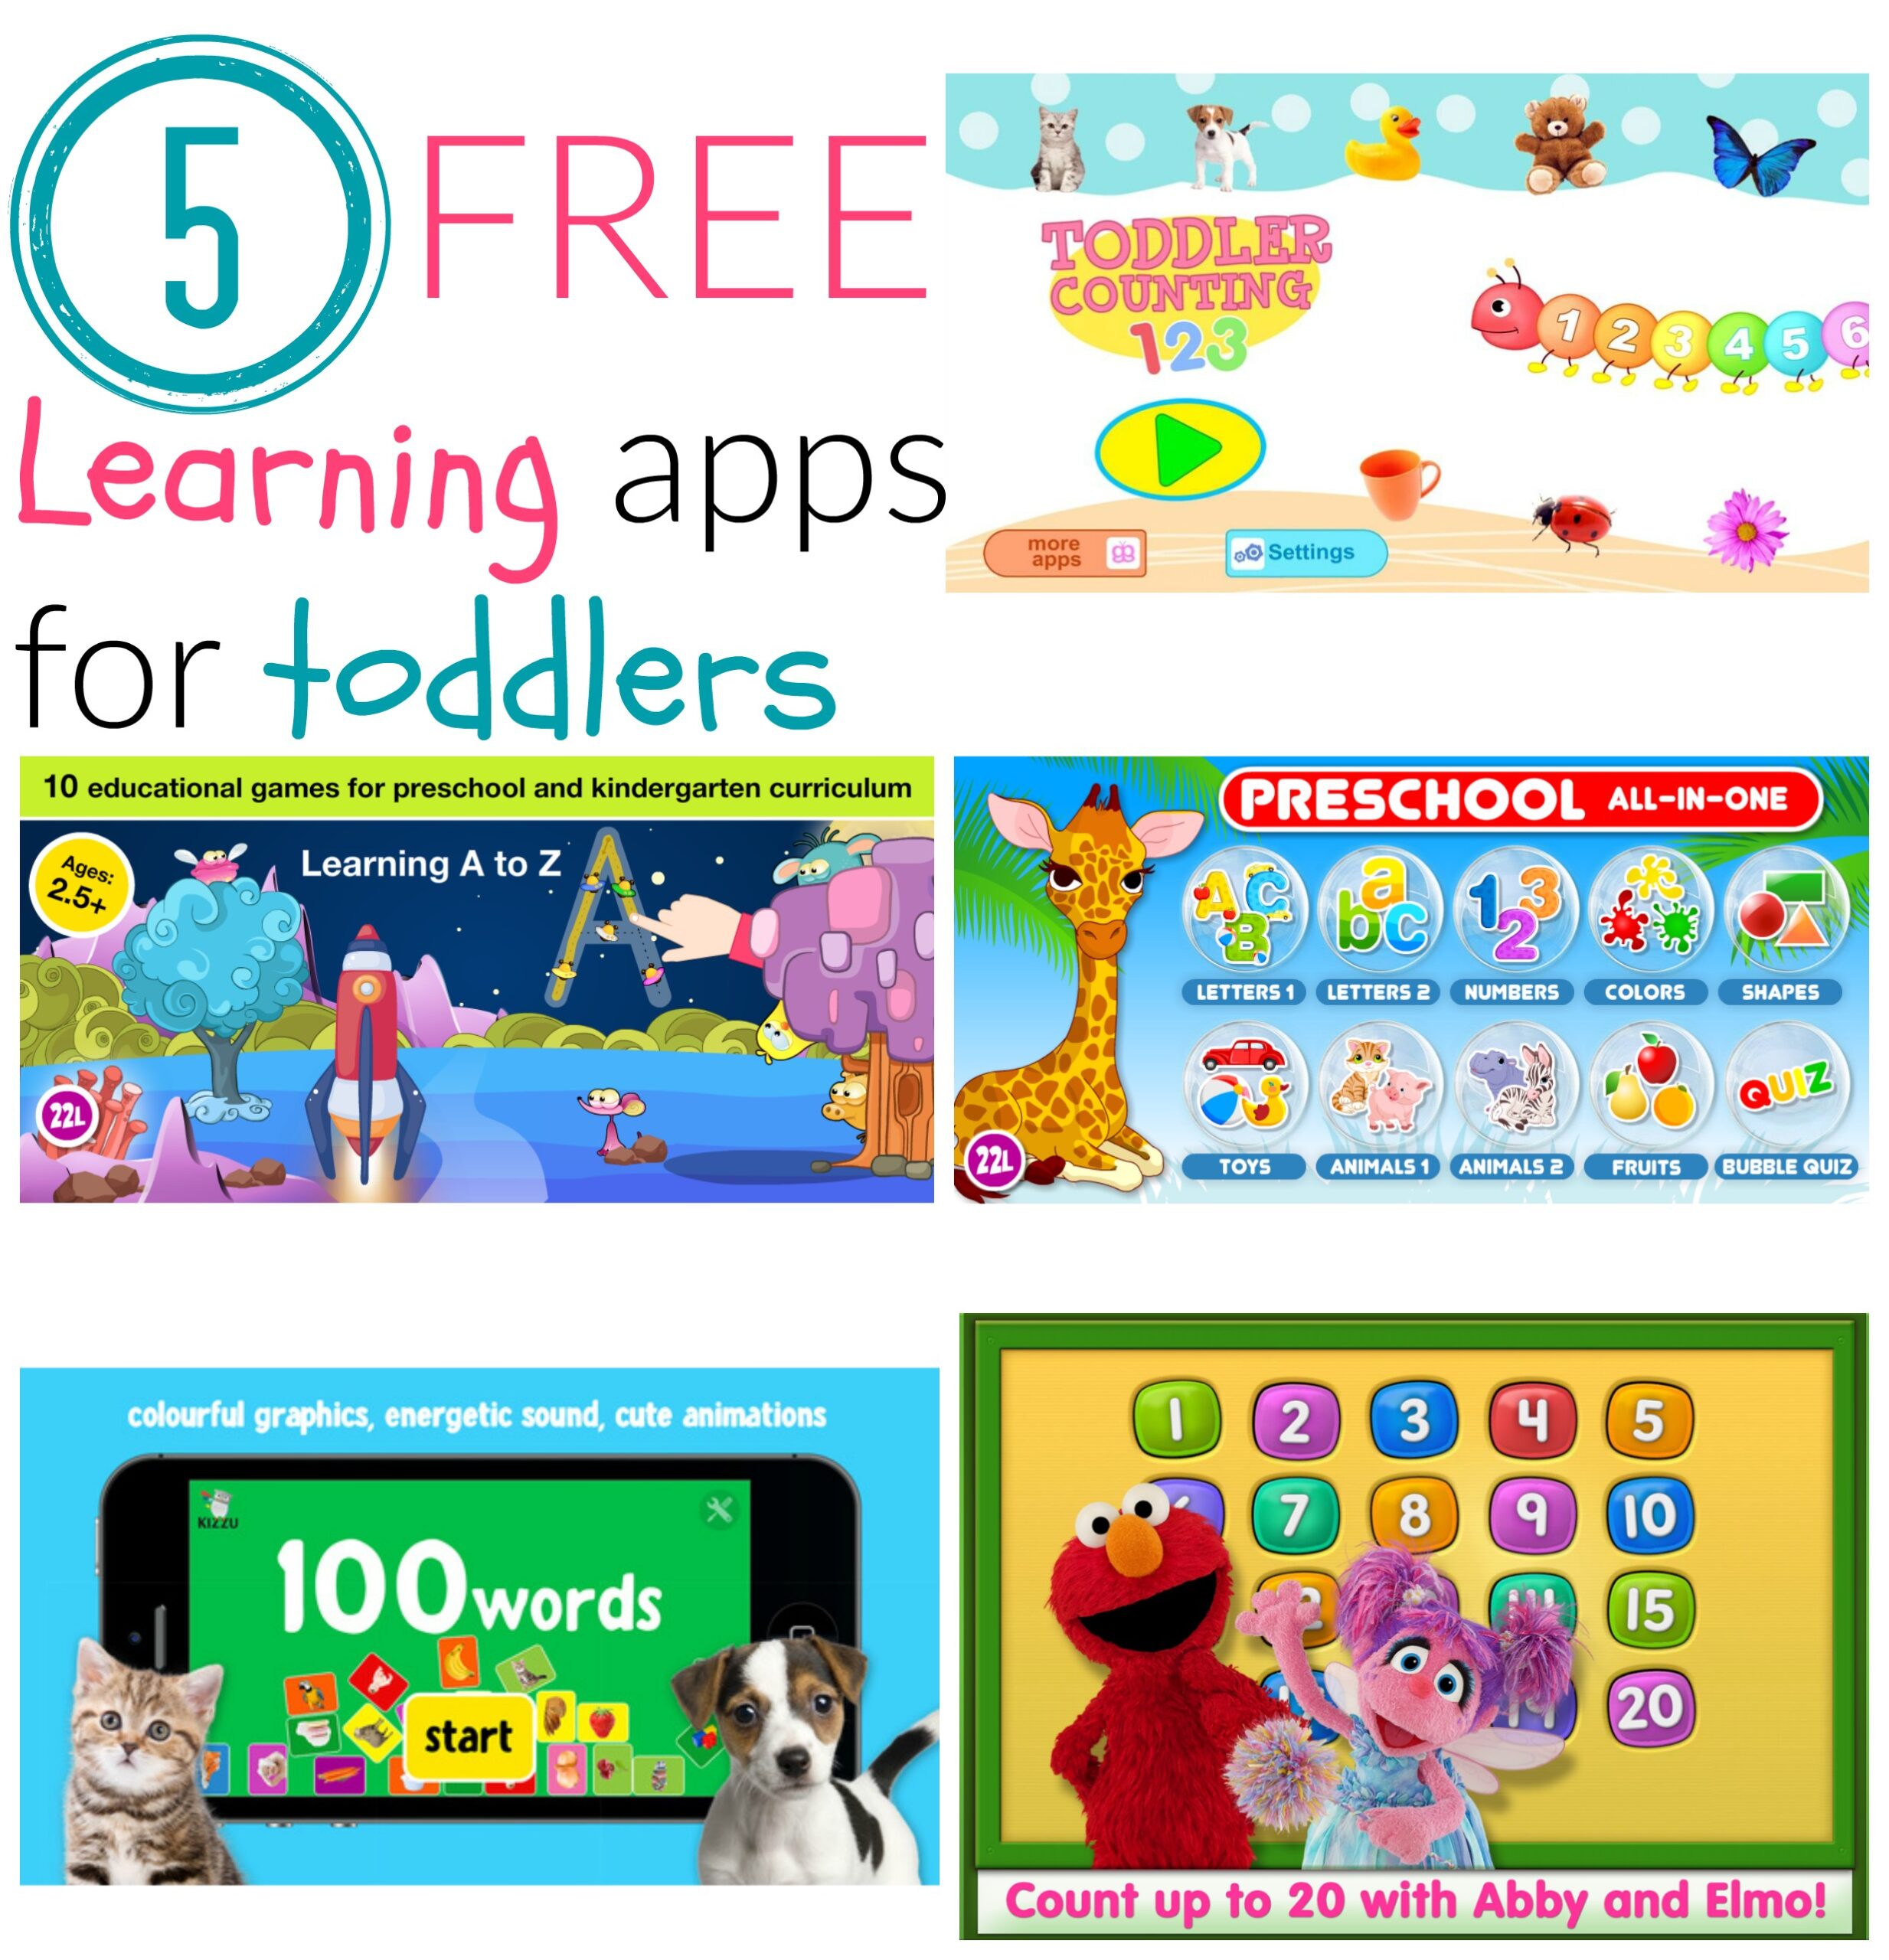 5 FREE Learning Apps for Toddlers - The Denver Housewife